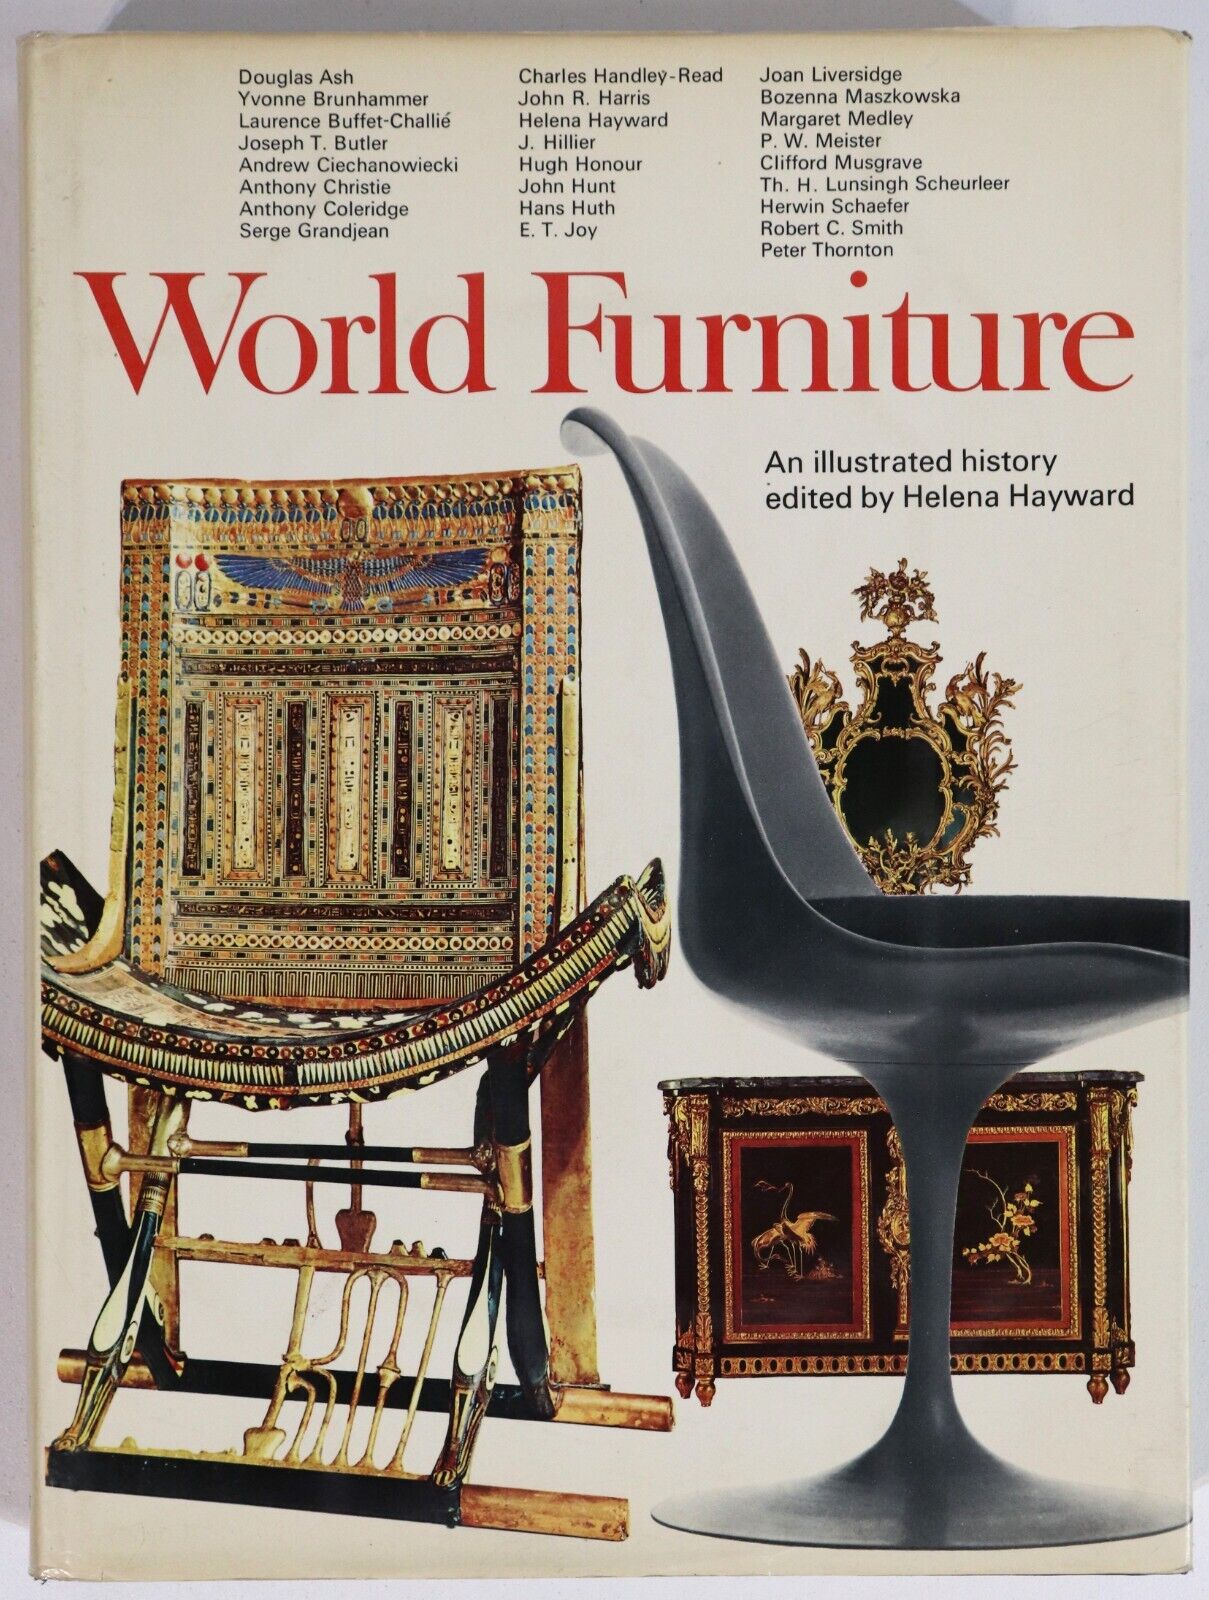 World Furniture by Helena Hayward - 1967 - Antique Furniture Reference Book